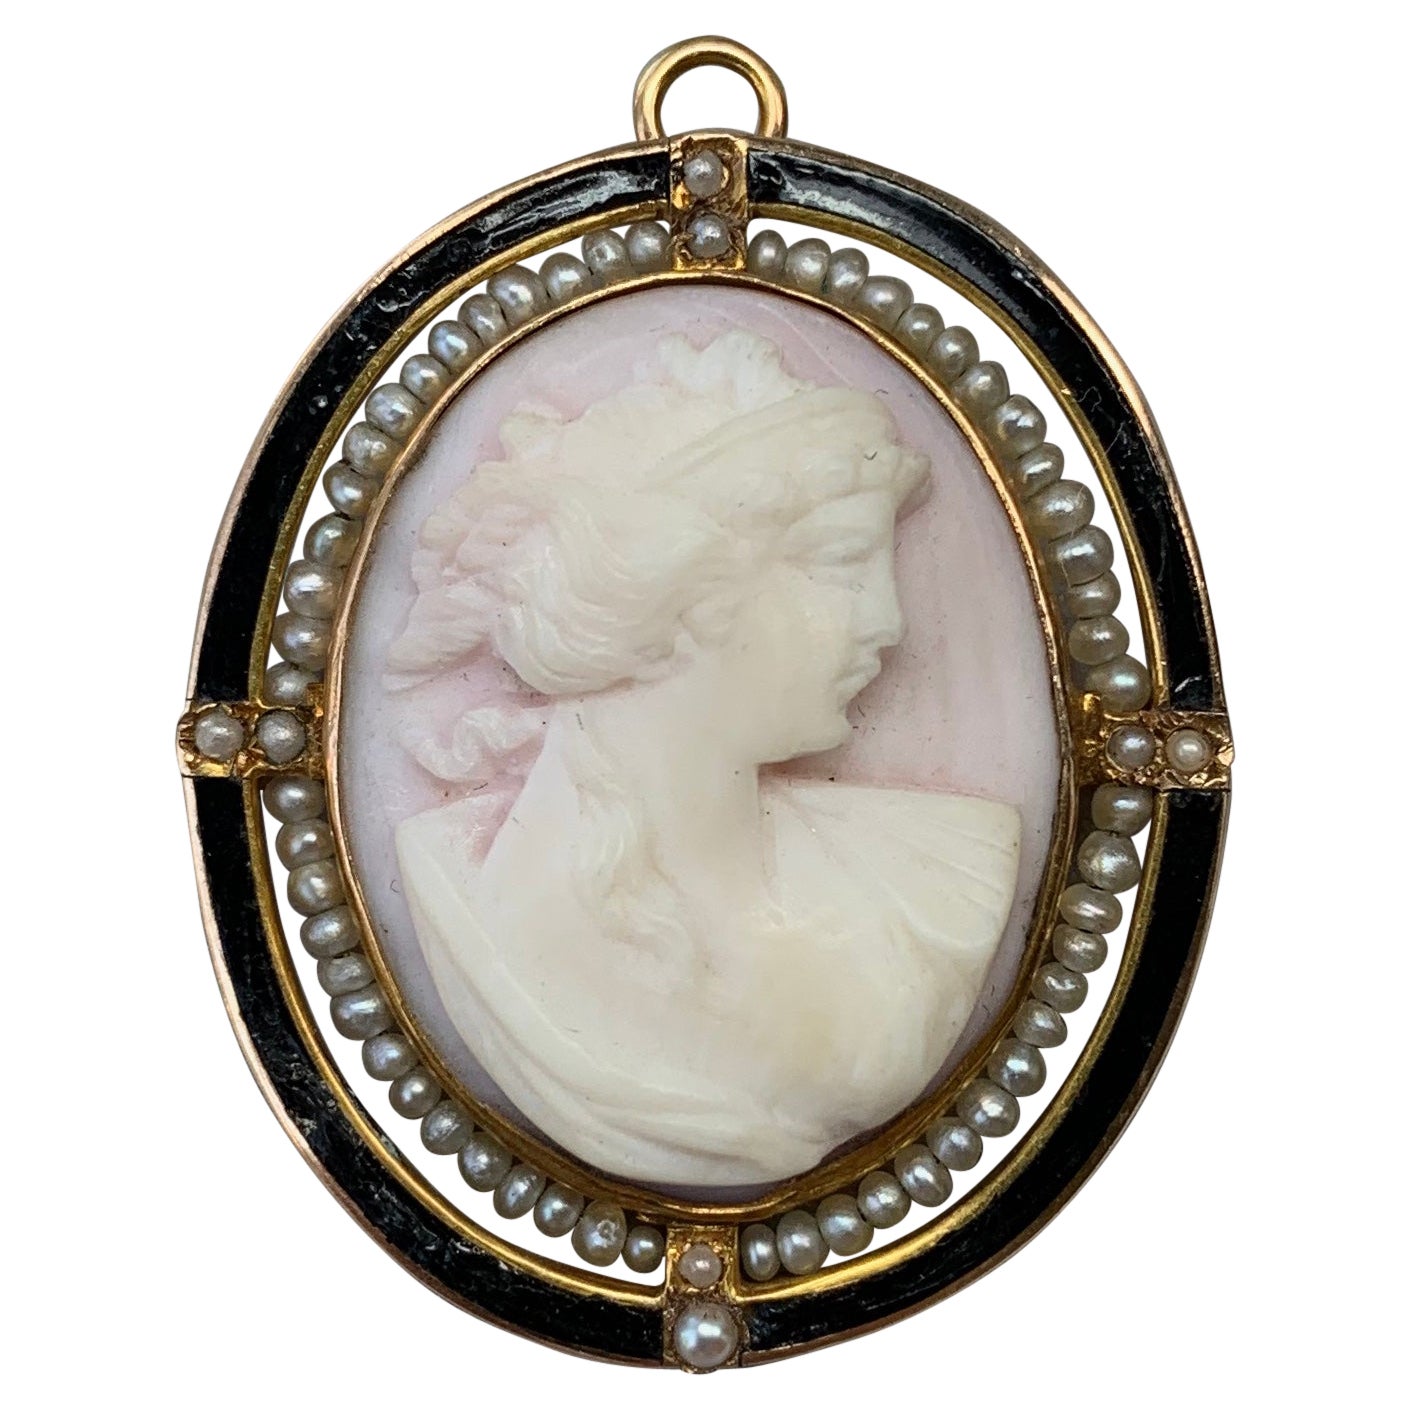 Coral Enamel Pearl Goddess Cameo Pendant Brooch Necklace Gold Antique Victorian